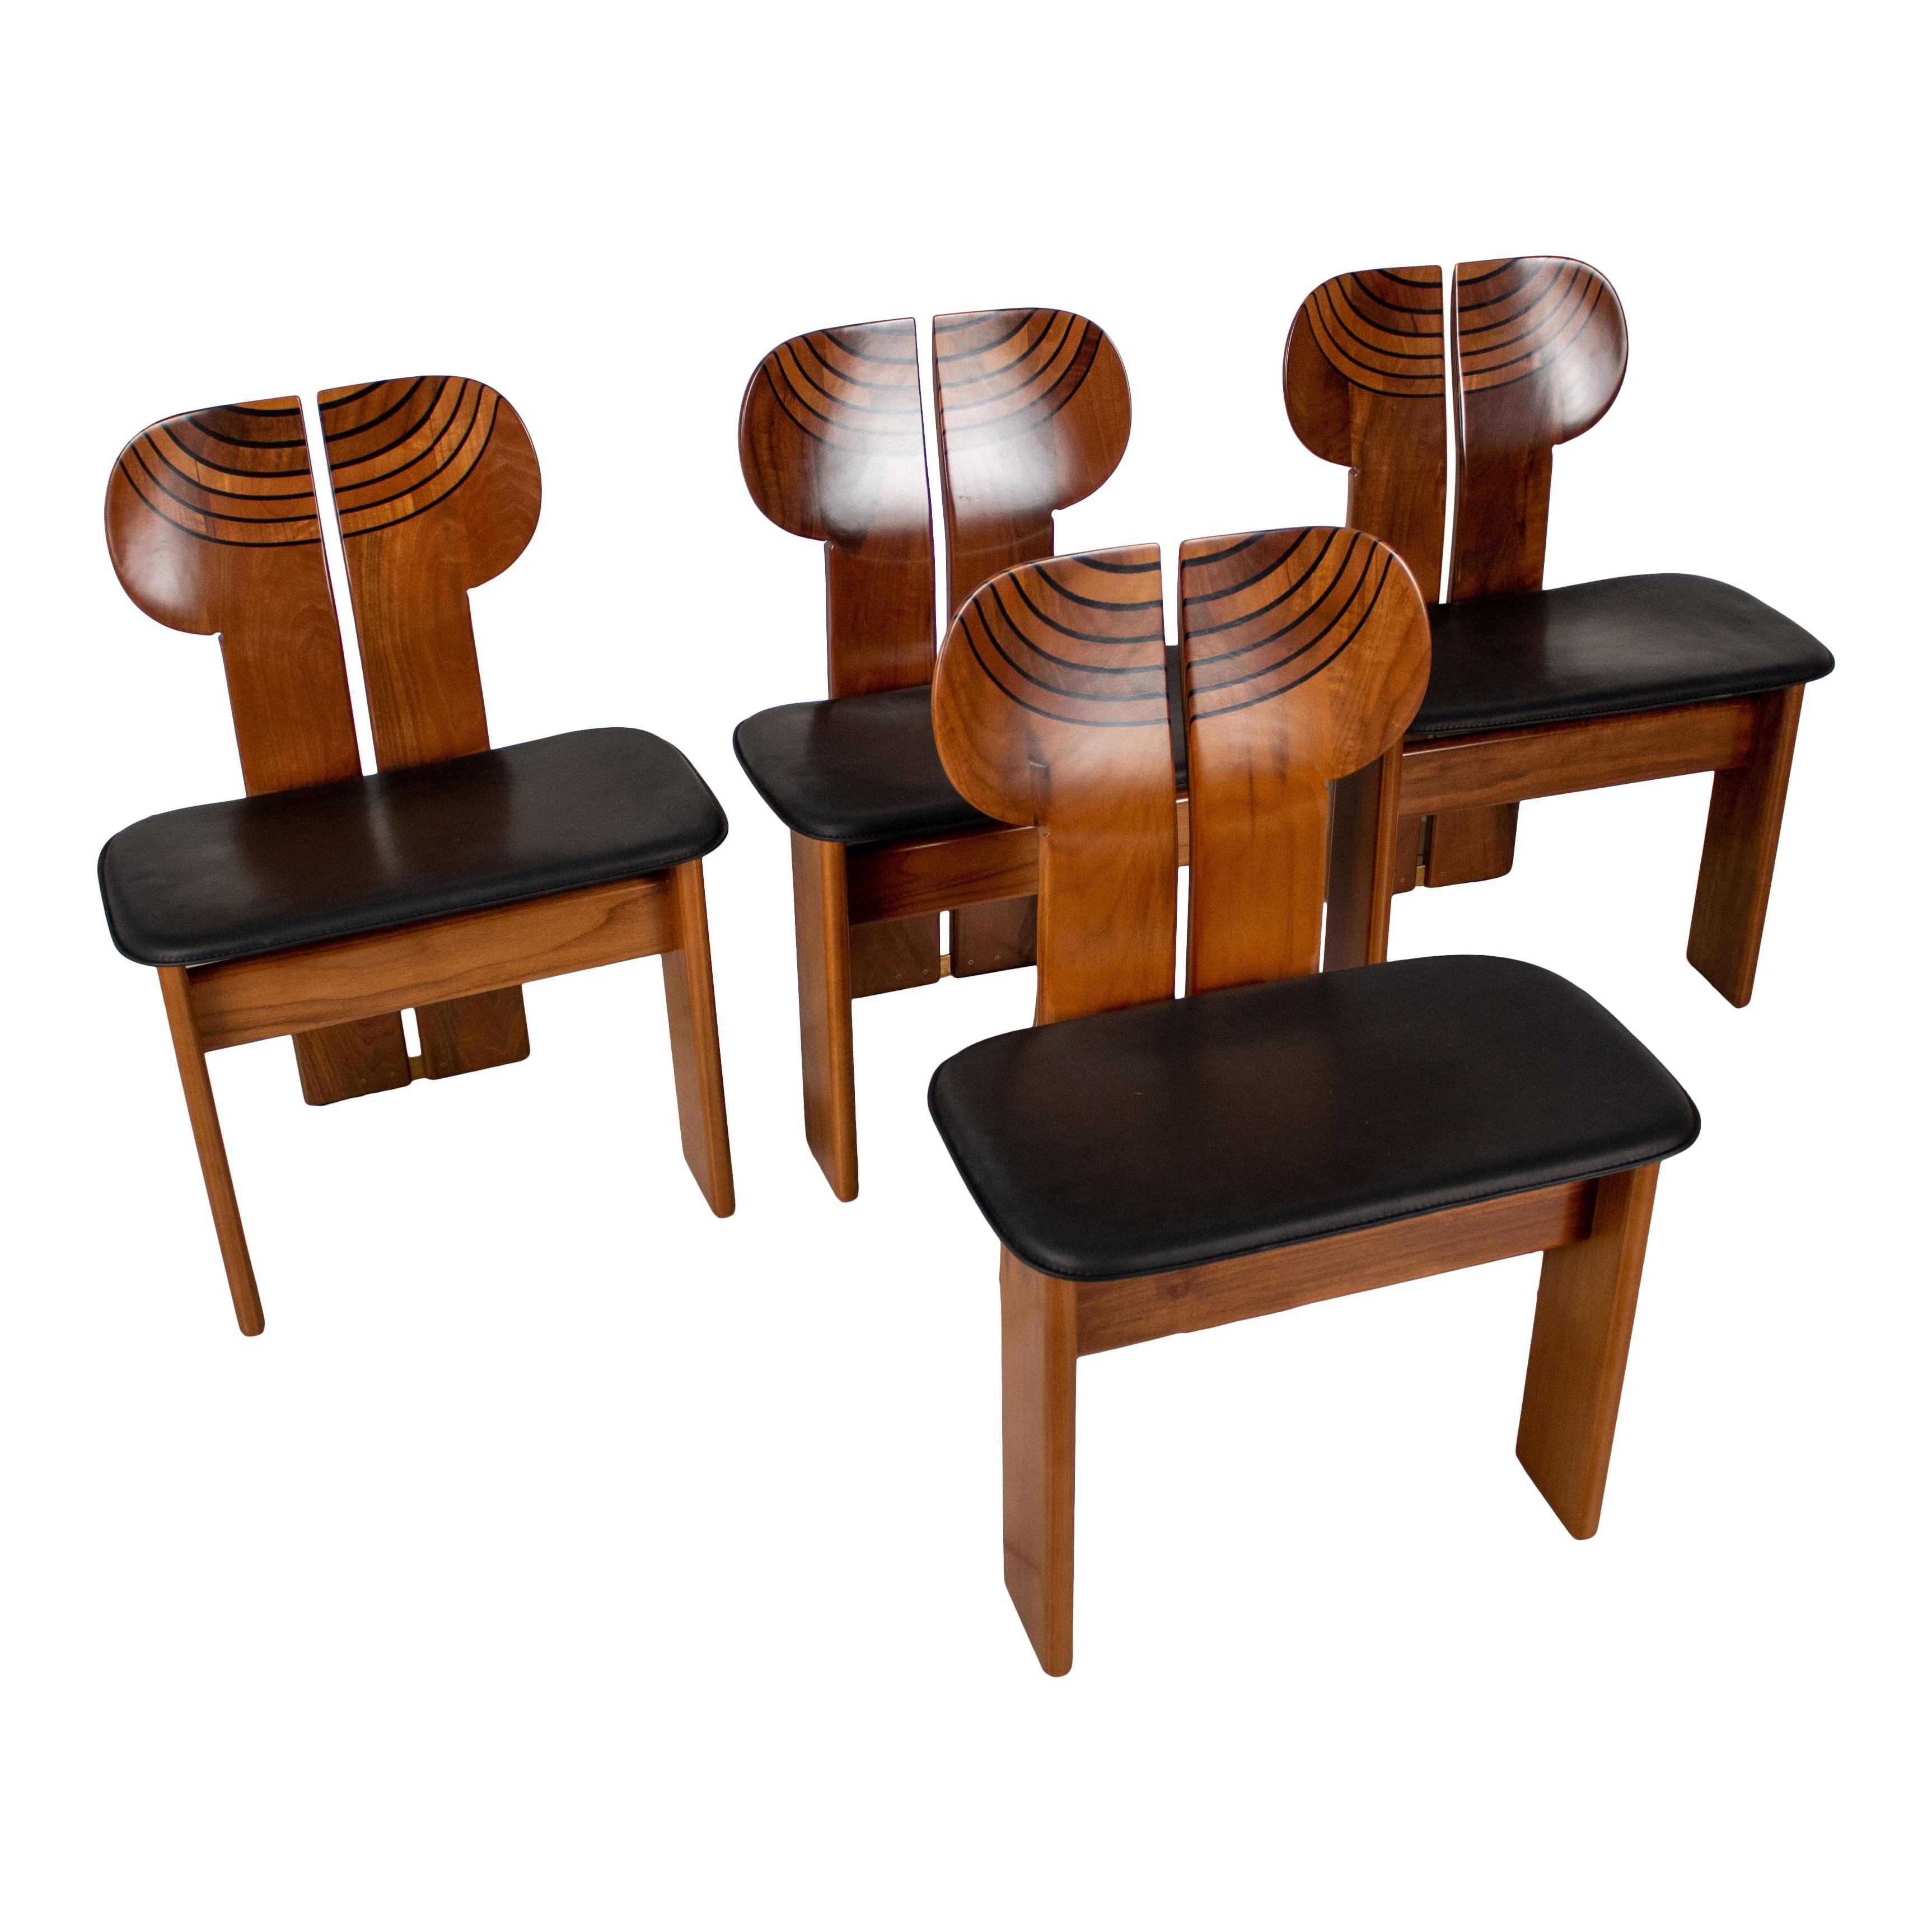 Afra and Tobia Scarpa Walnut Africa Dining Chair for Maxalto, 1976, Set of 4 In Good Condition For Sale In Vicenza, IT